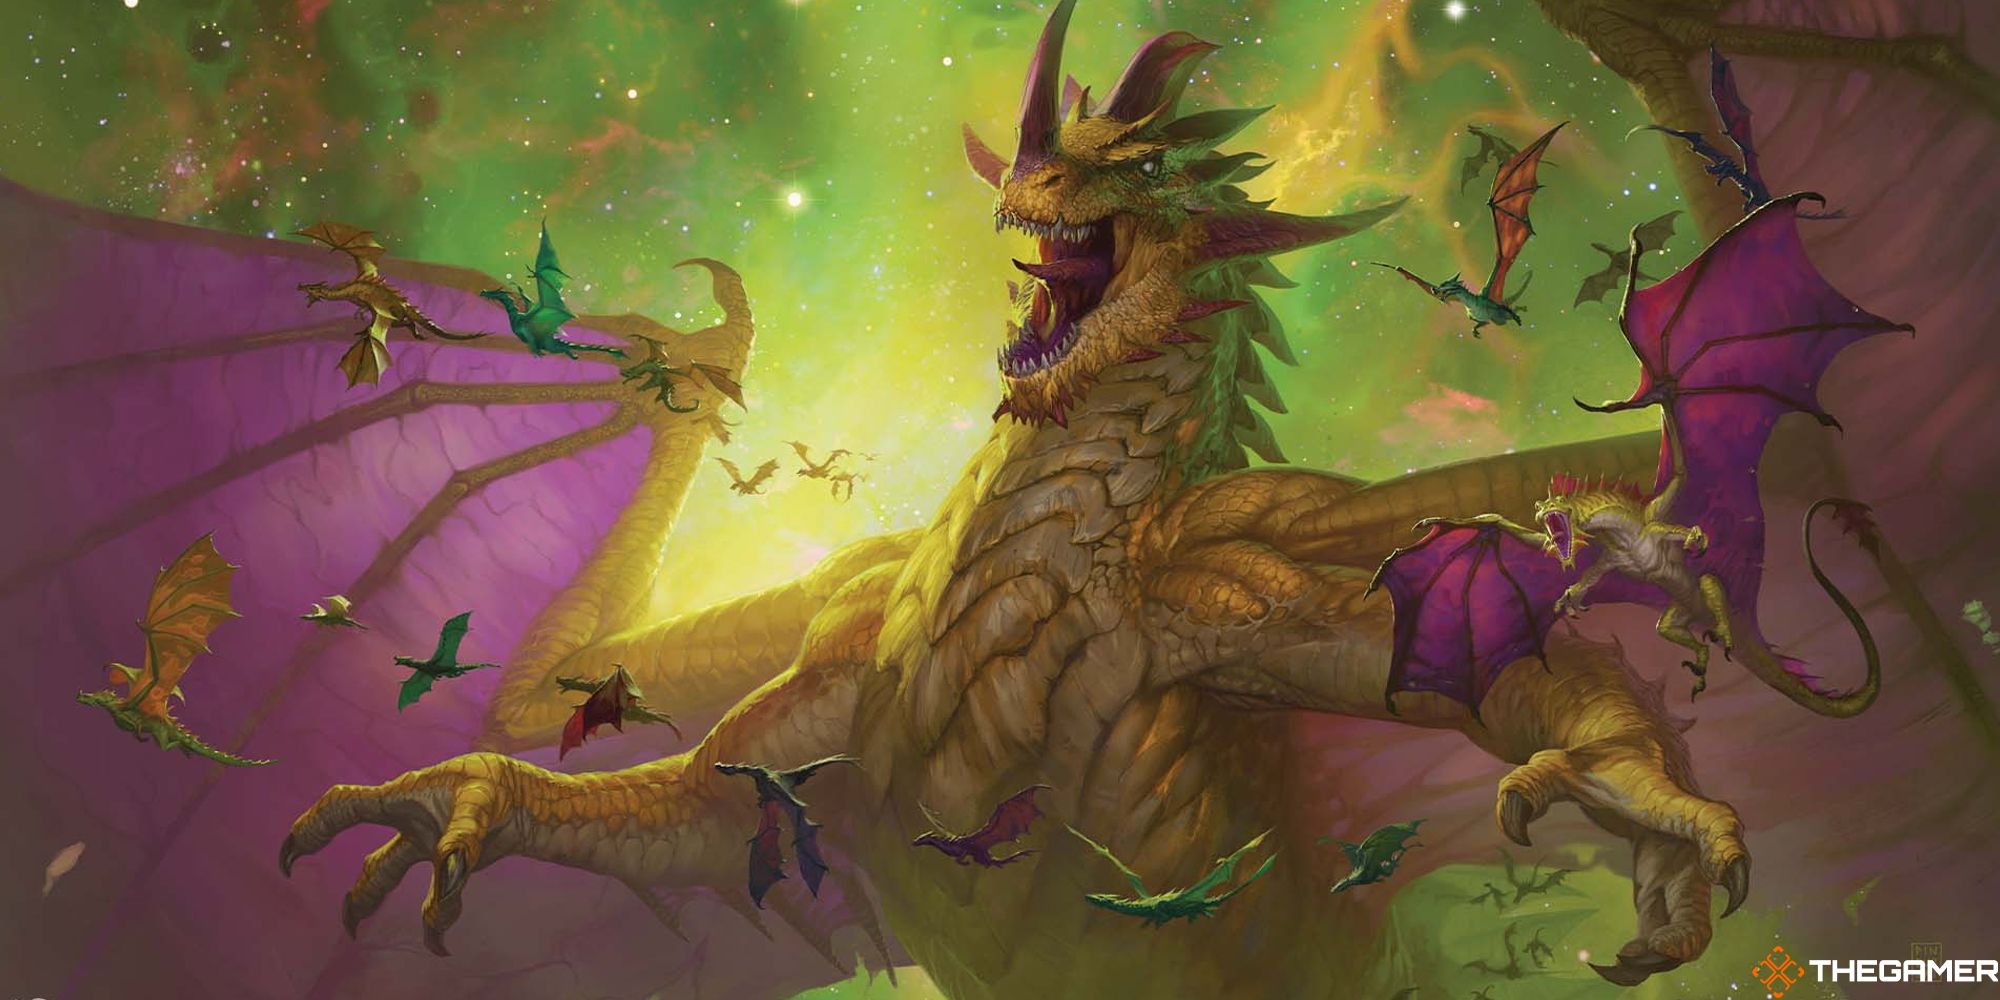 A large, yellow dragon surrounded by smaller ones.